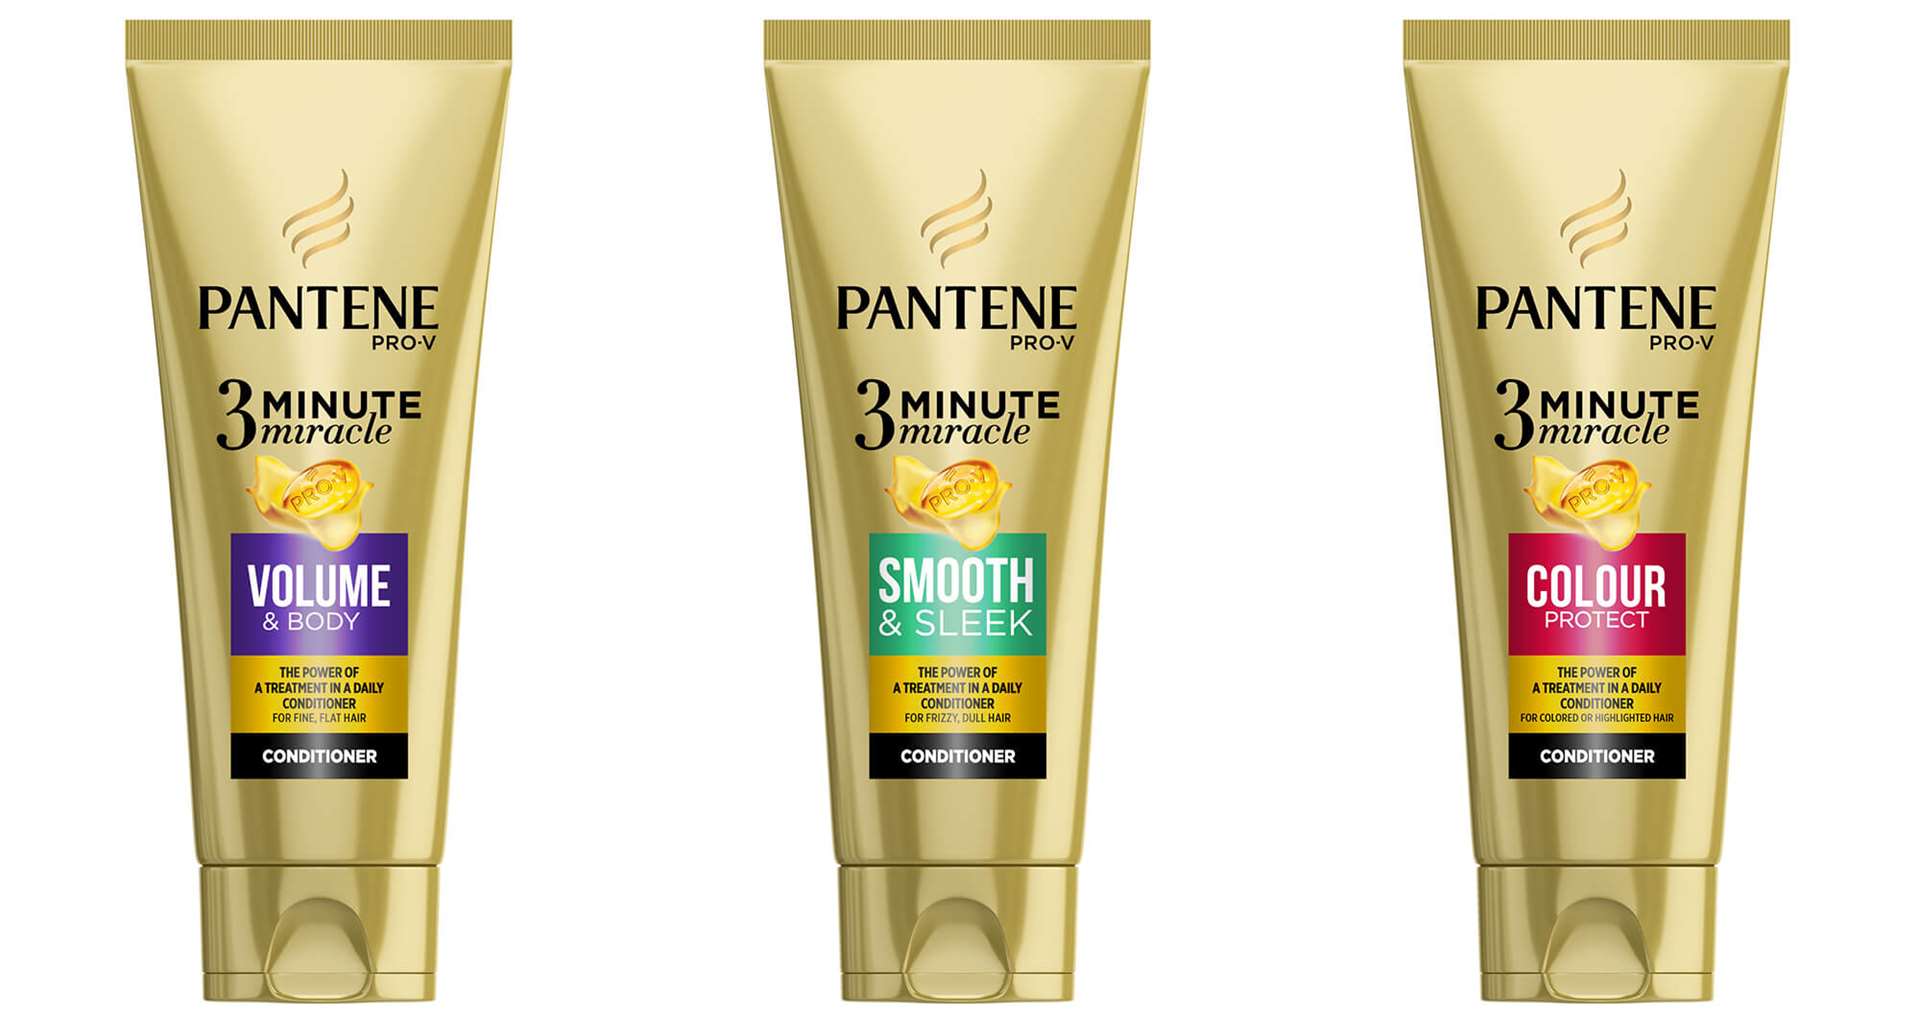 More than 25 million bottles of Pantene 3 Minute Miracle have been sold in the US in just a few months